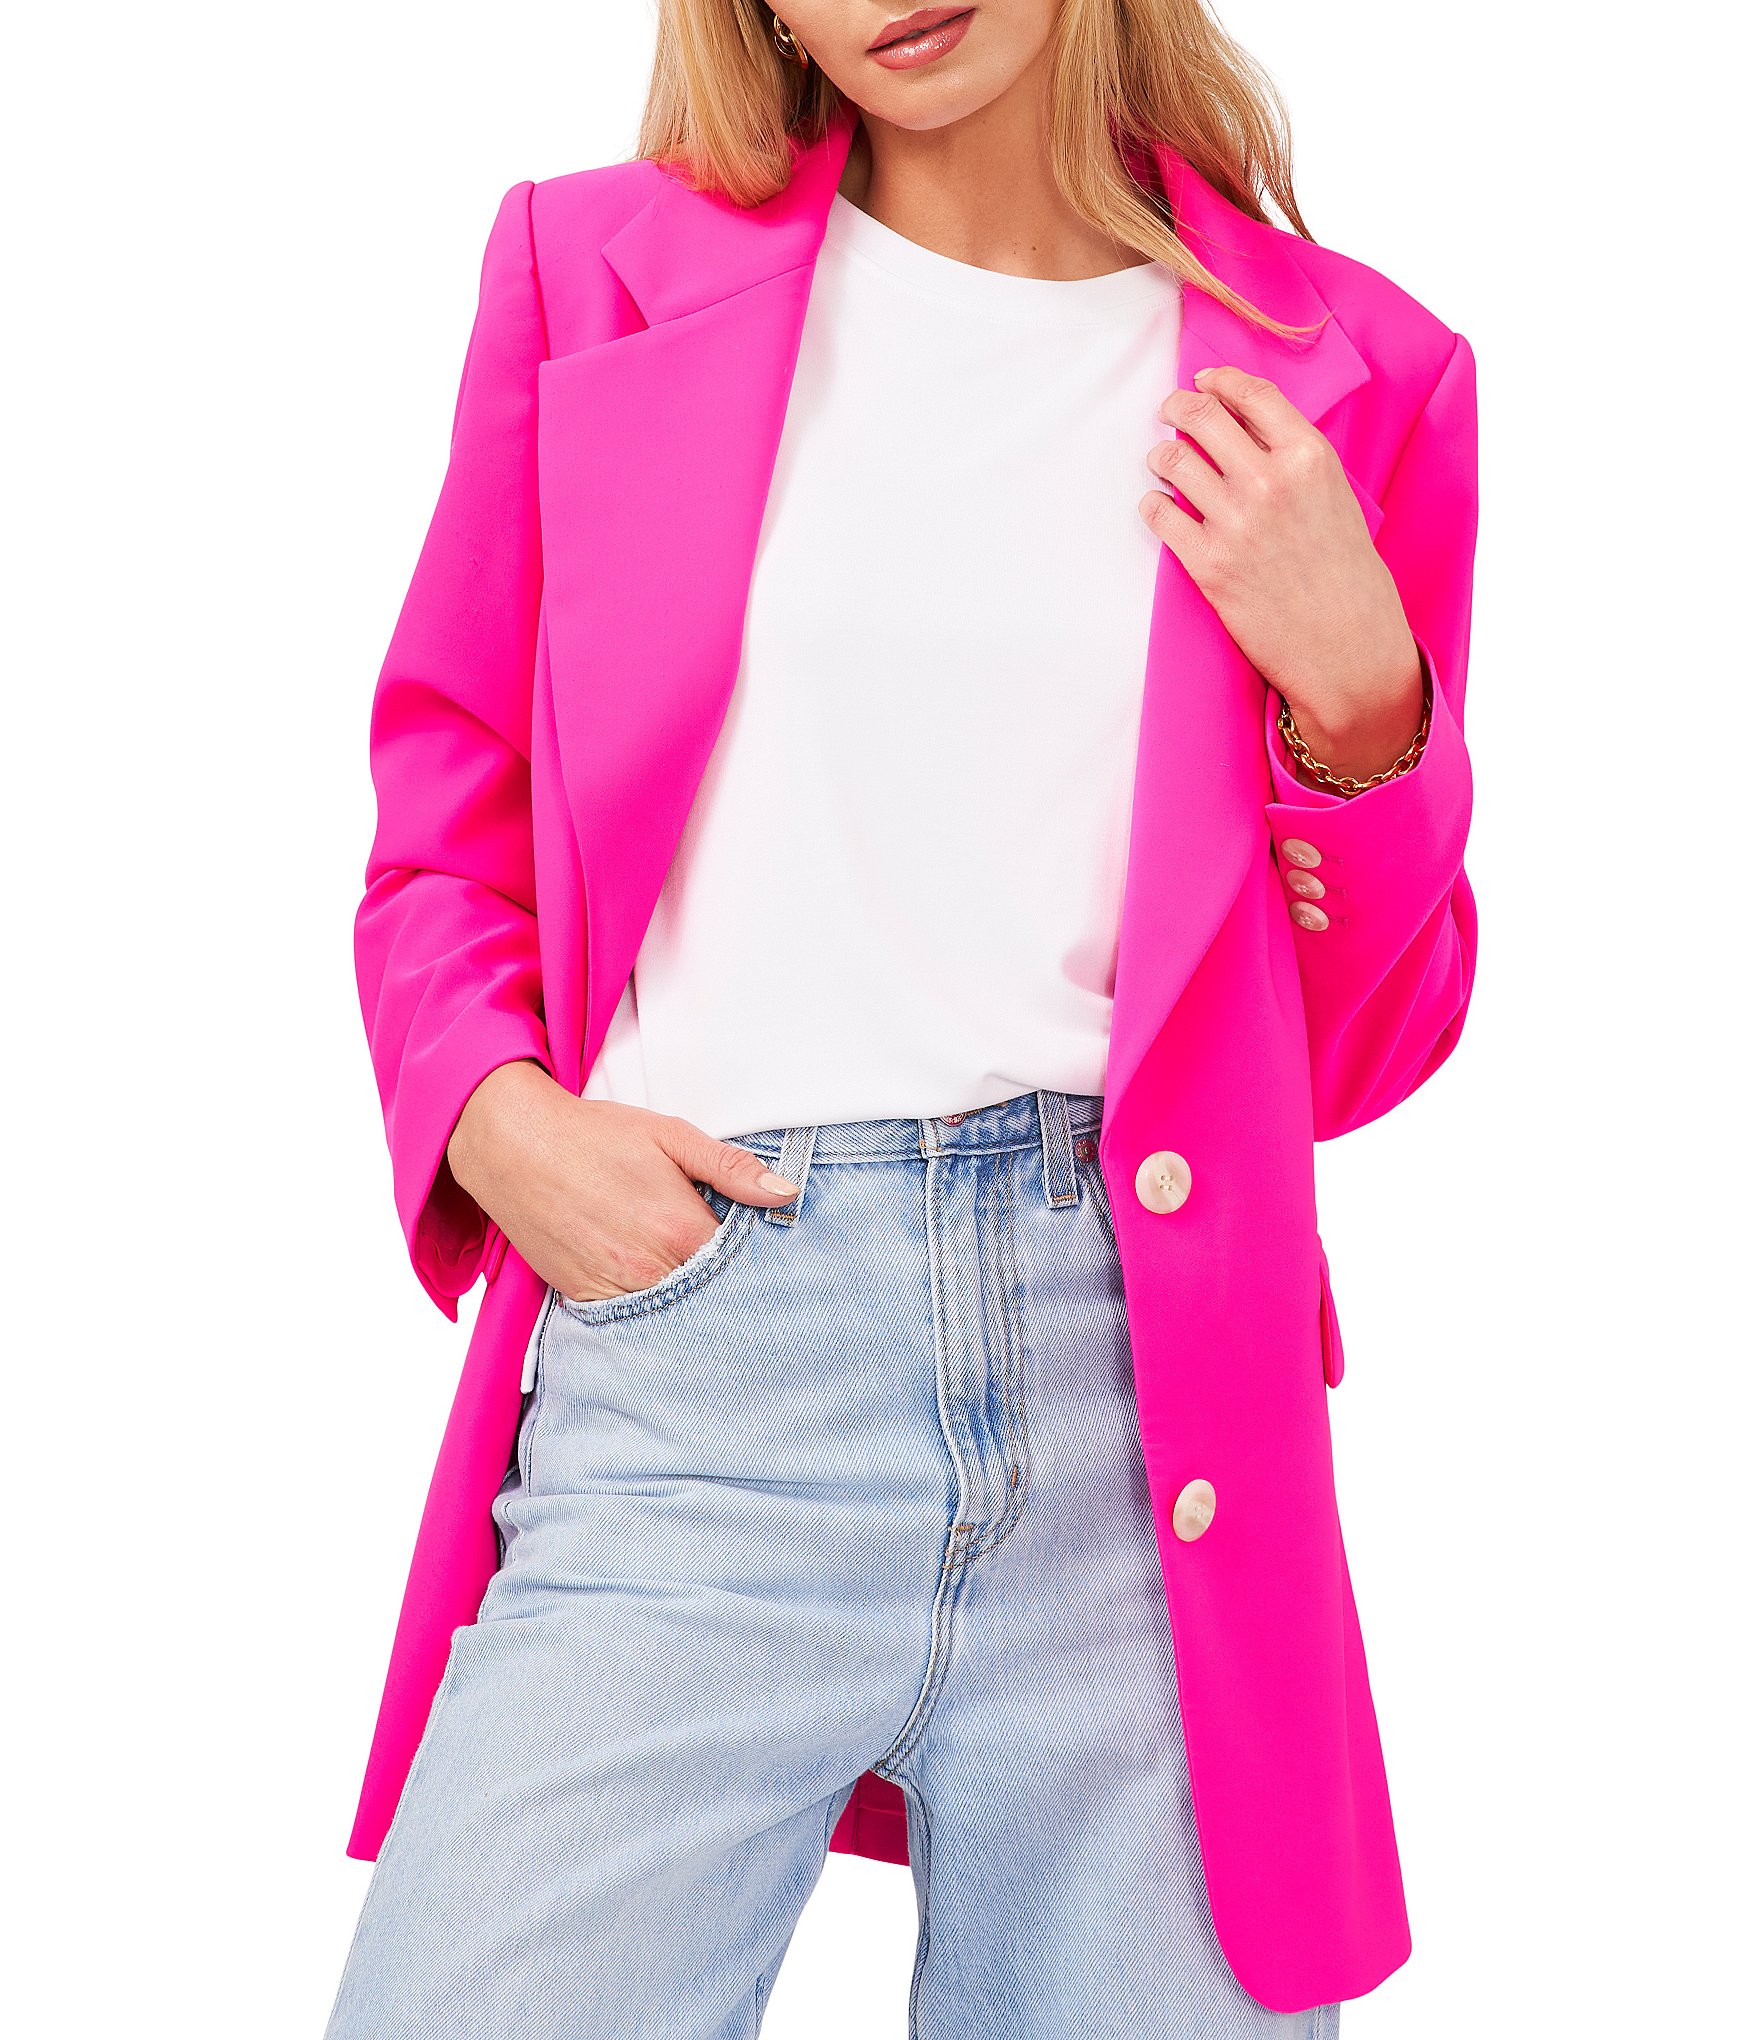 https://dimg.dillards.com/is/image/DillardsZoom/zoom/vince-camuto-long-sleeve-notch-lapel-button-front-relaxed-fit-blazer/00000000_zi_aab75898-3127-4c60-902b-586221833422.jpg